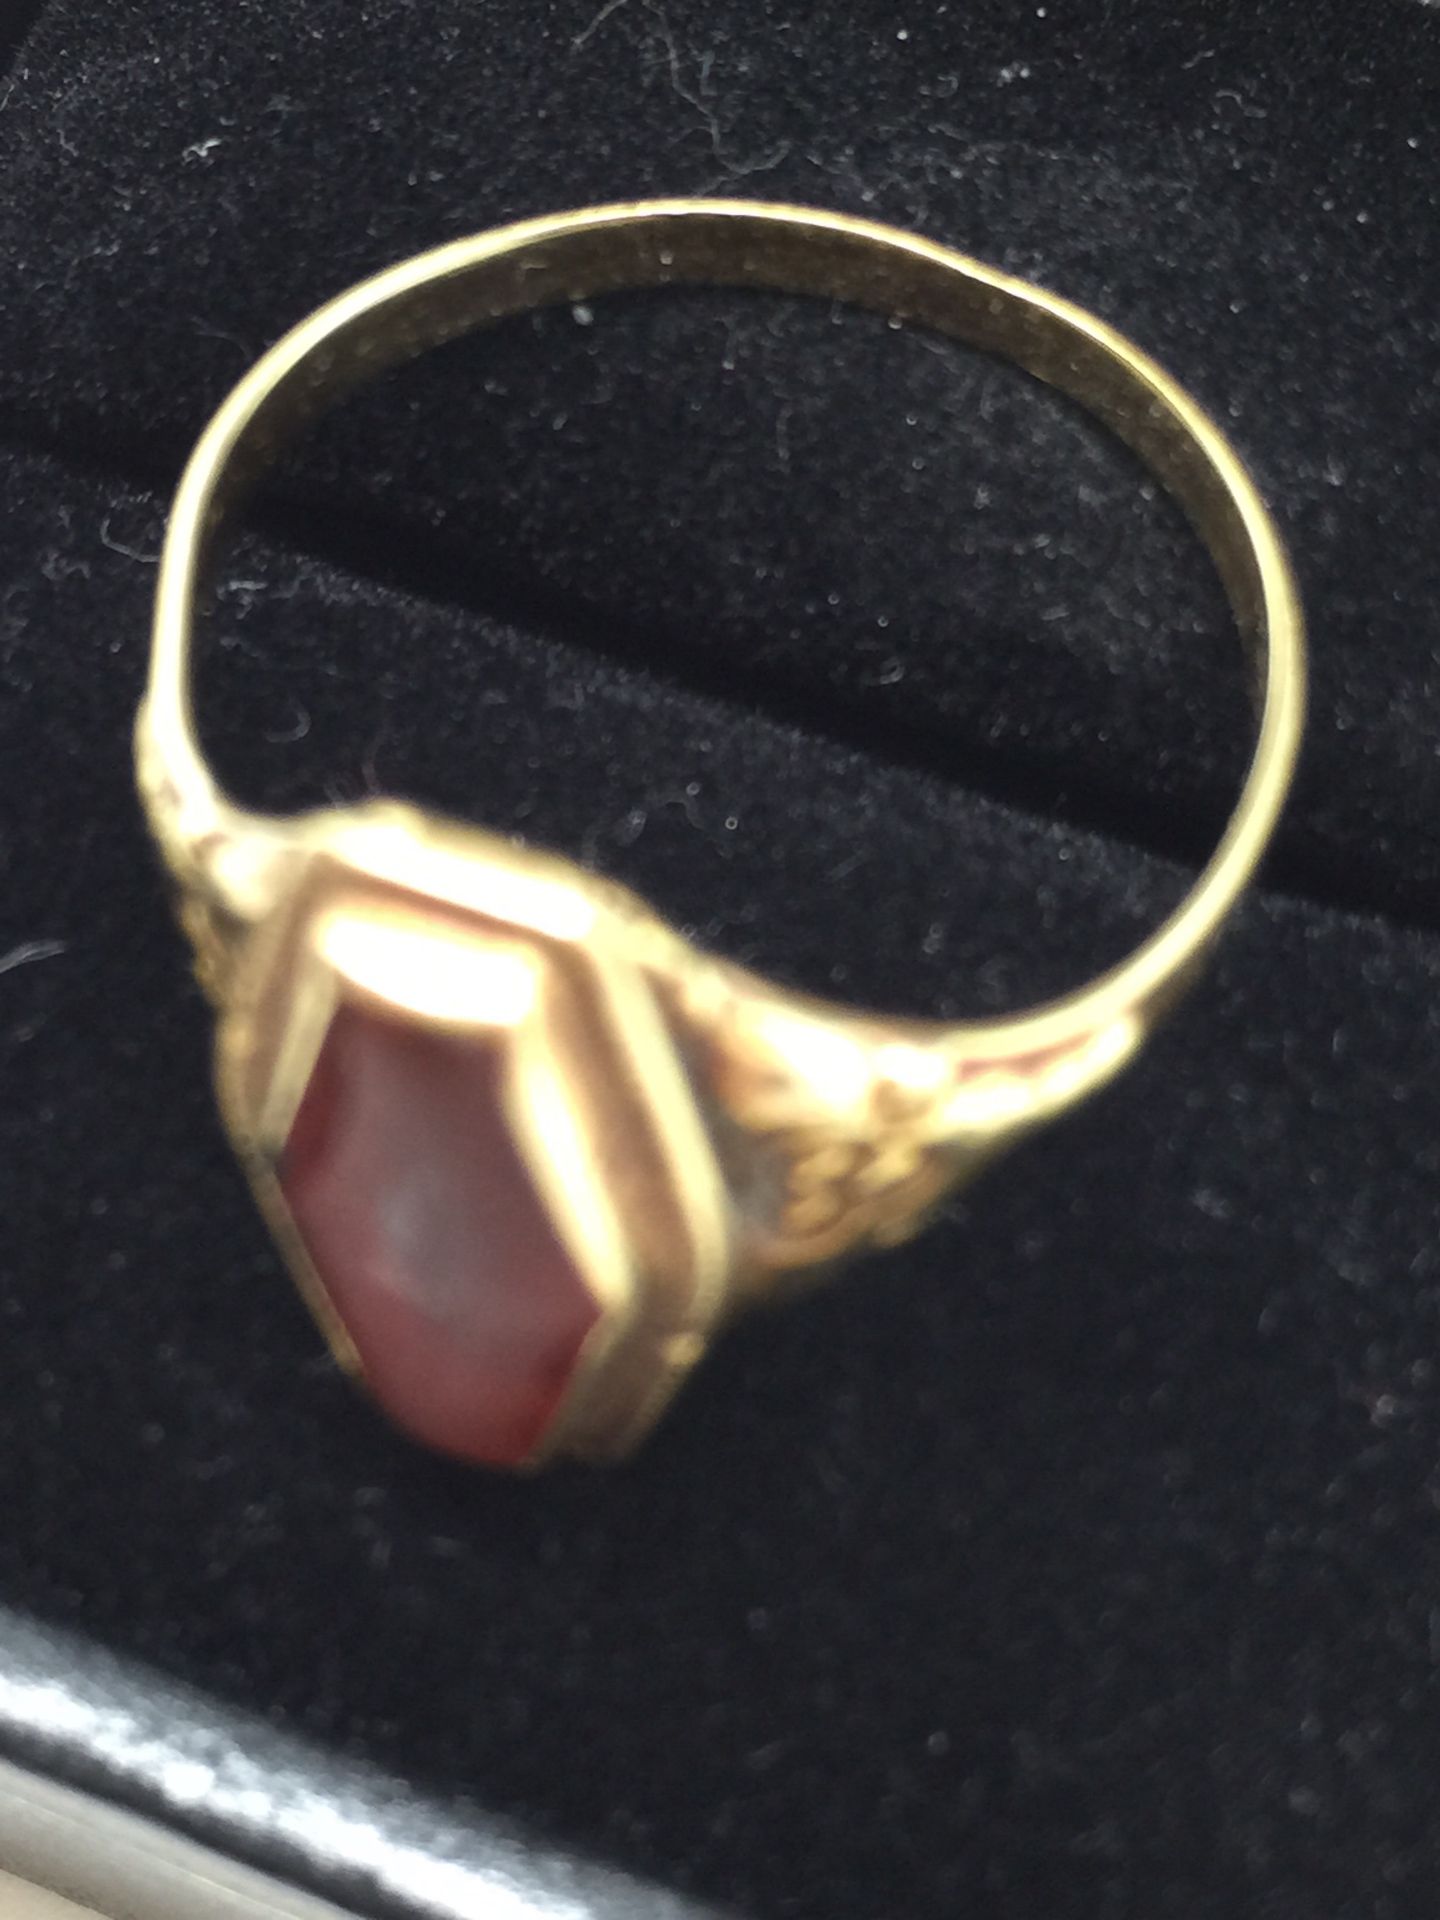 ANTIQUE 14ct GOLD RING SET WITH UNUSUAL STONE - Image 4 of 4